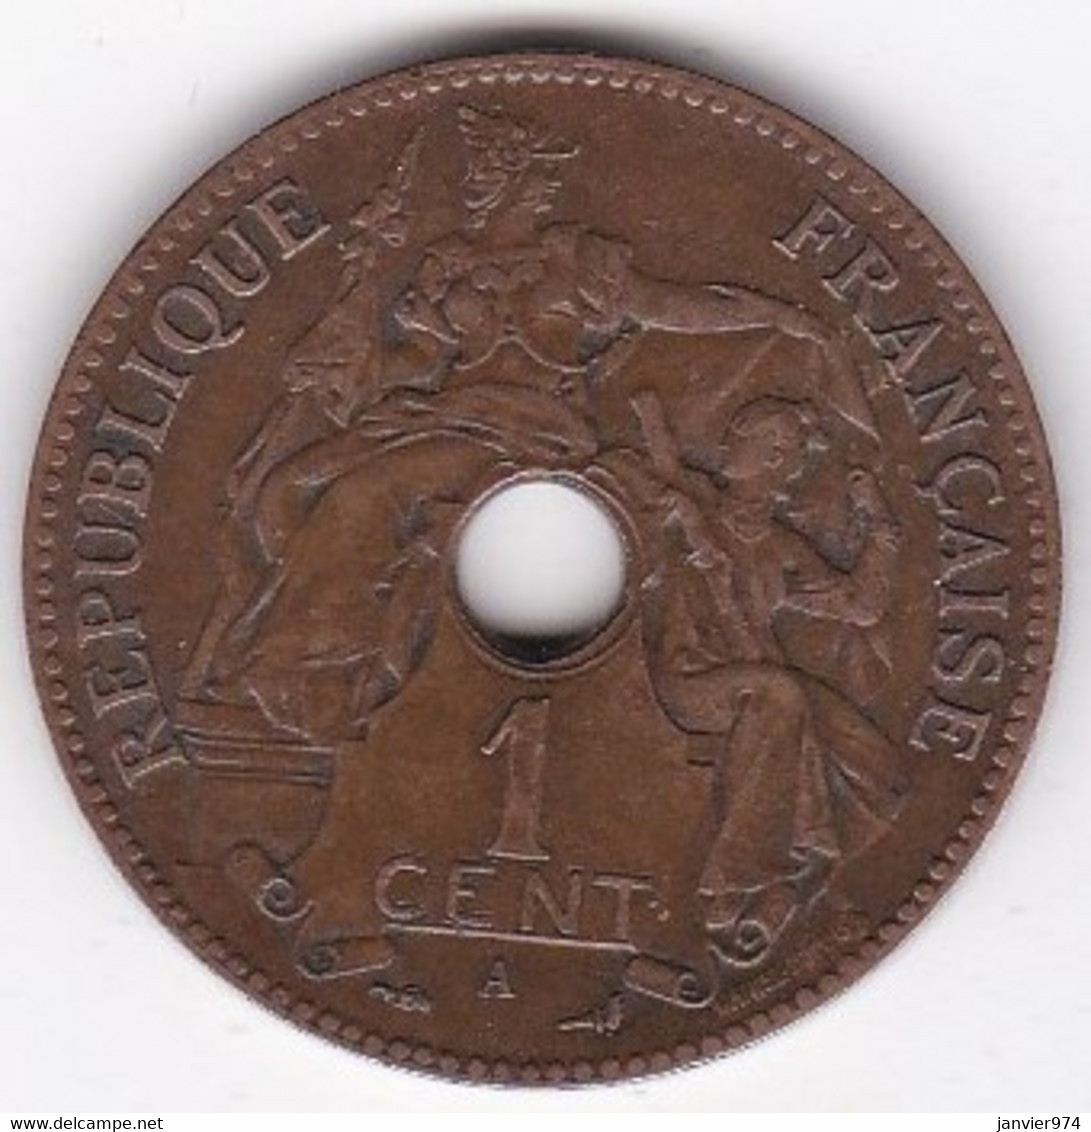 Indochine Française. 1 Cent 1903 A. Bronze, Sup /XF - Indochine